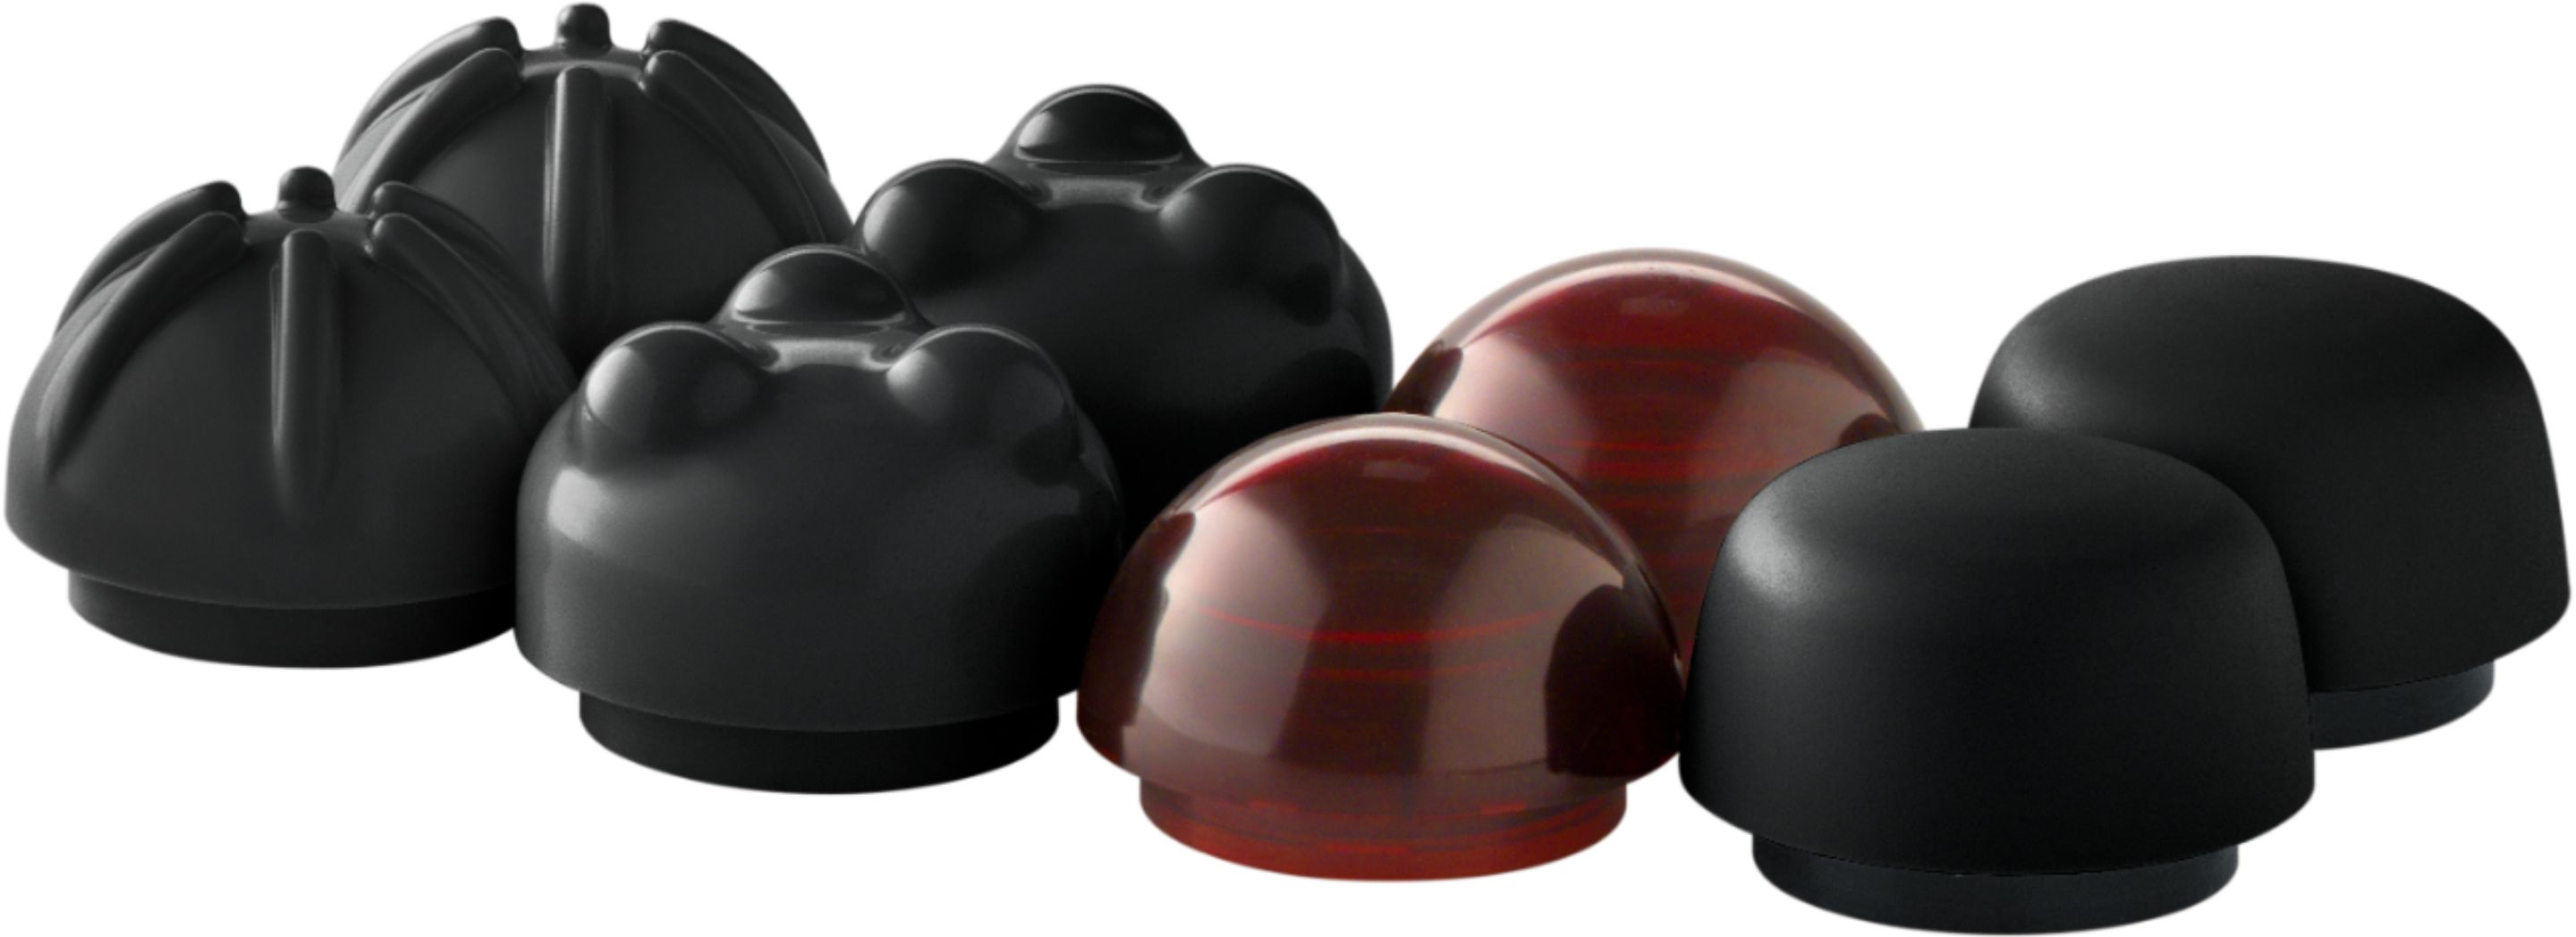 black series percussion massager